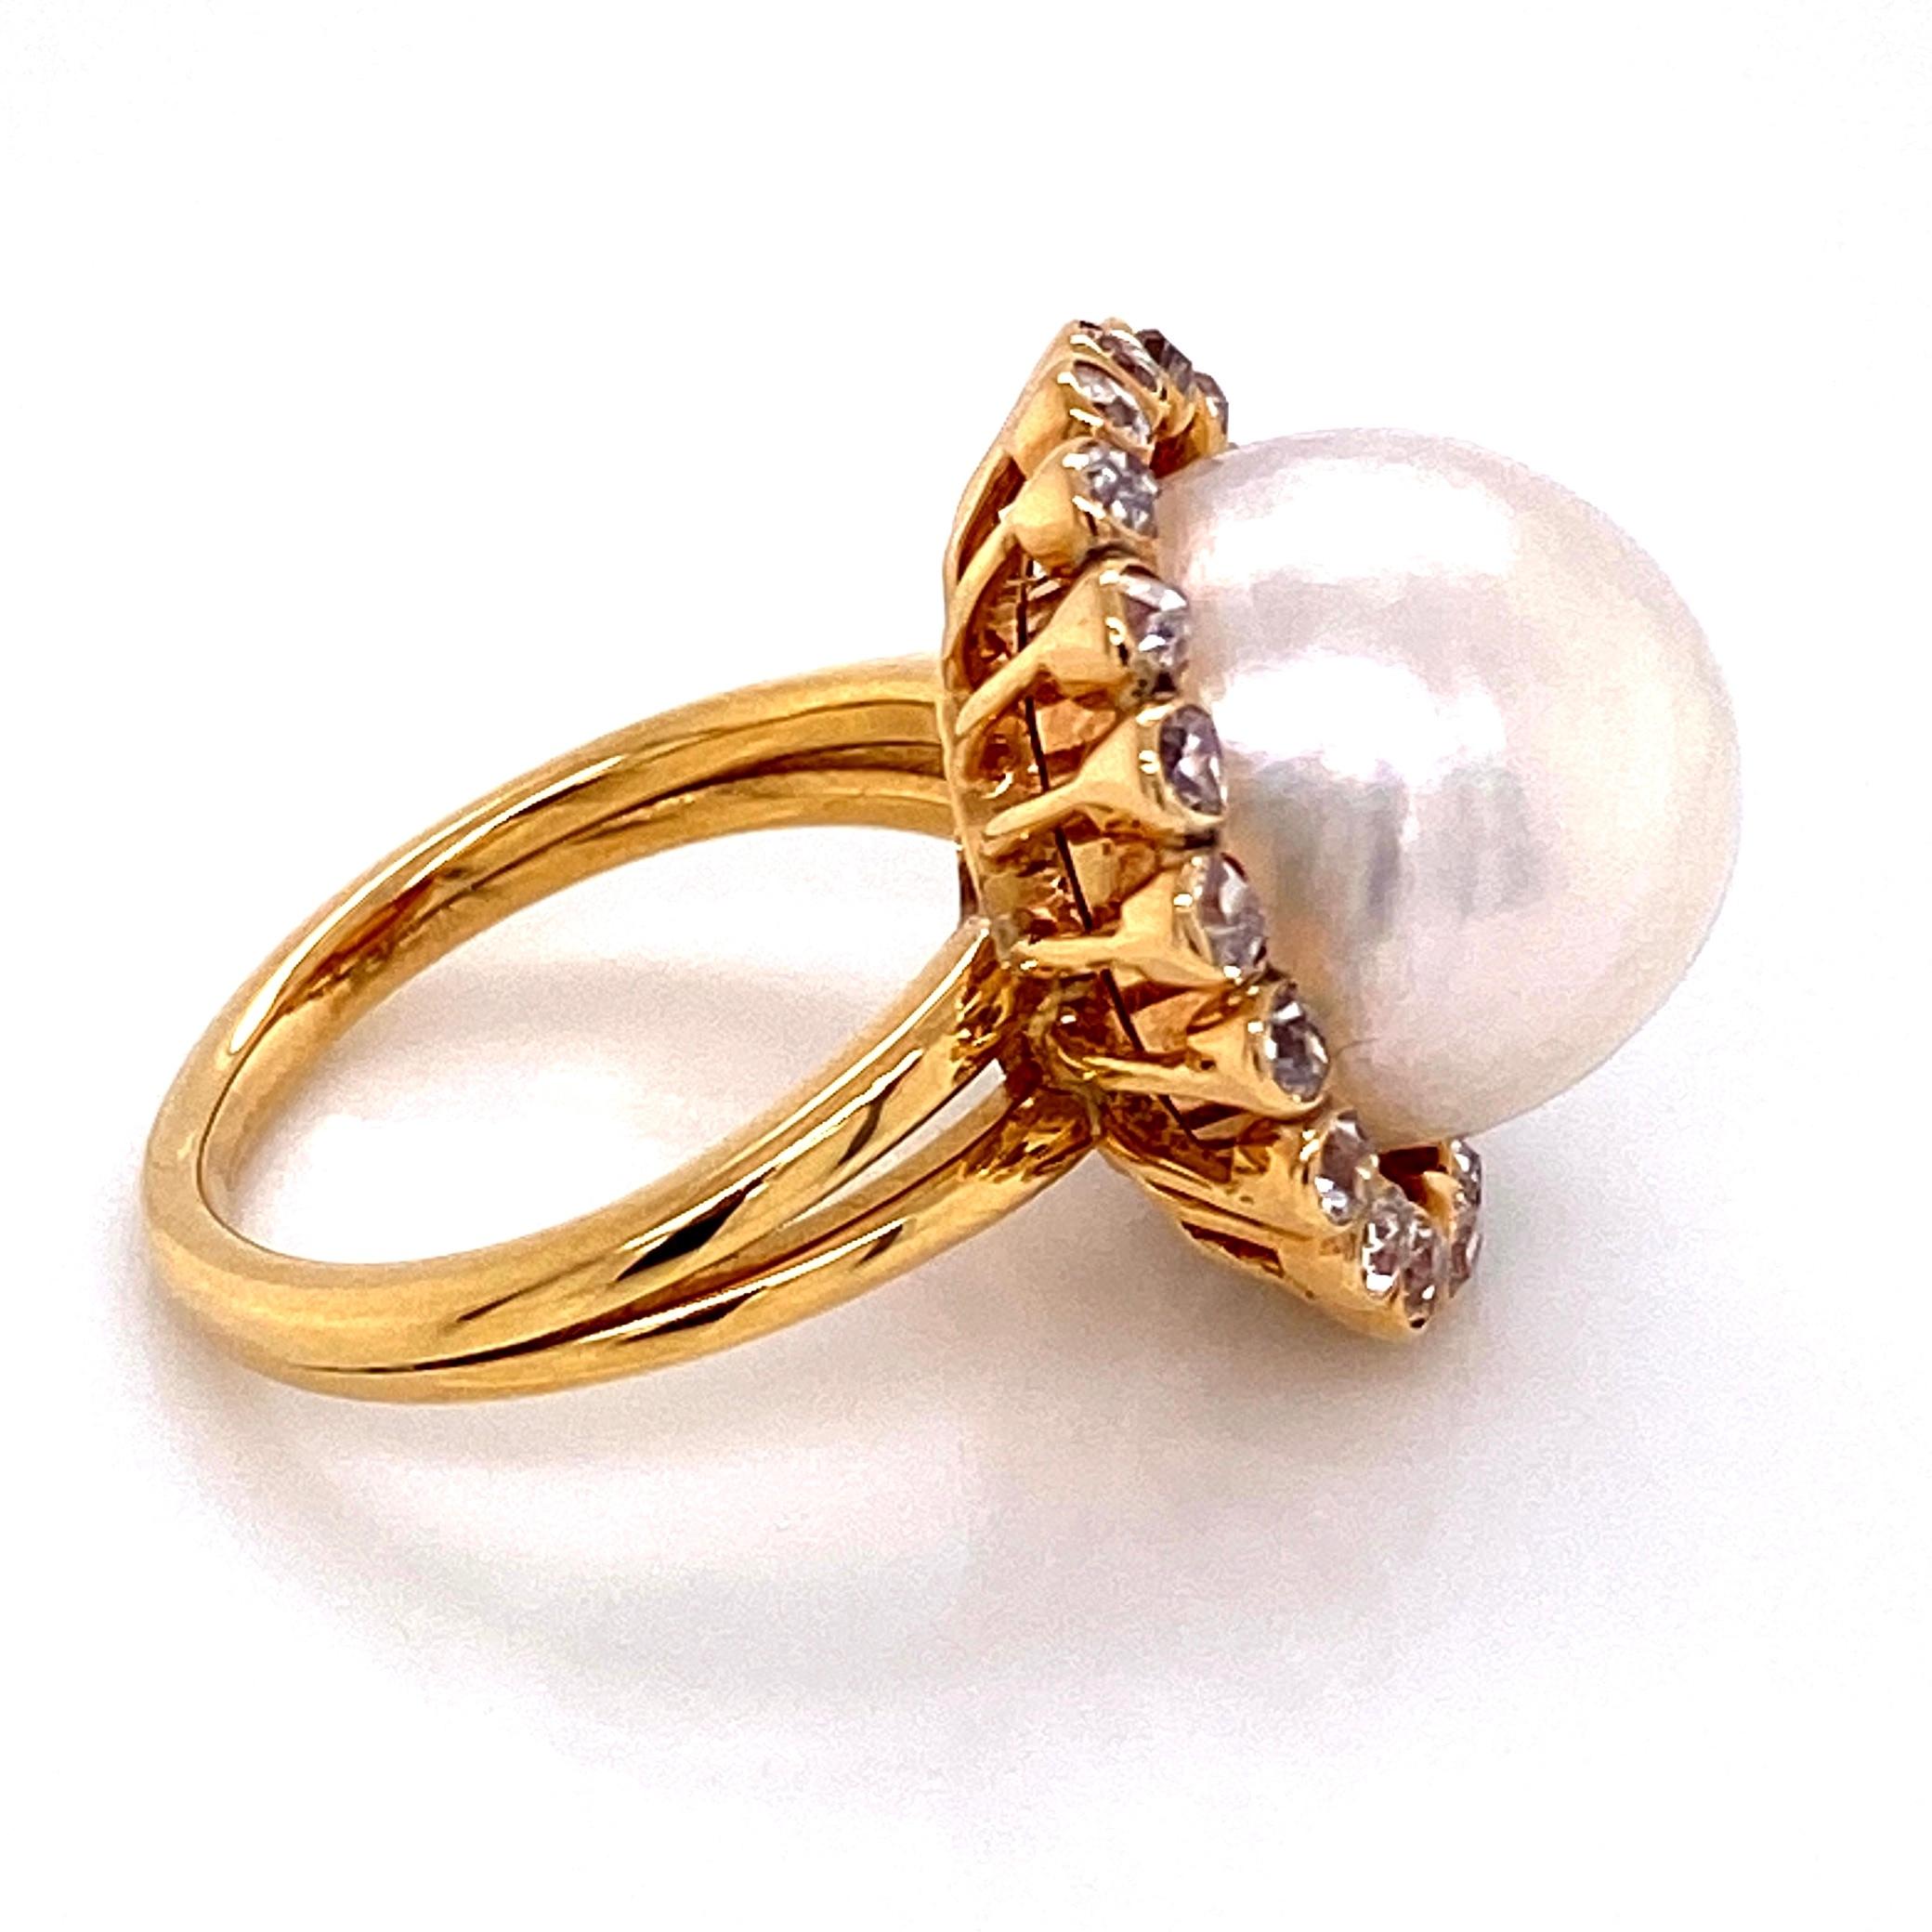 Late Victorian Pearl and Old European Diamond Victorian Gold Ring Estate Fine Jewelry